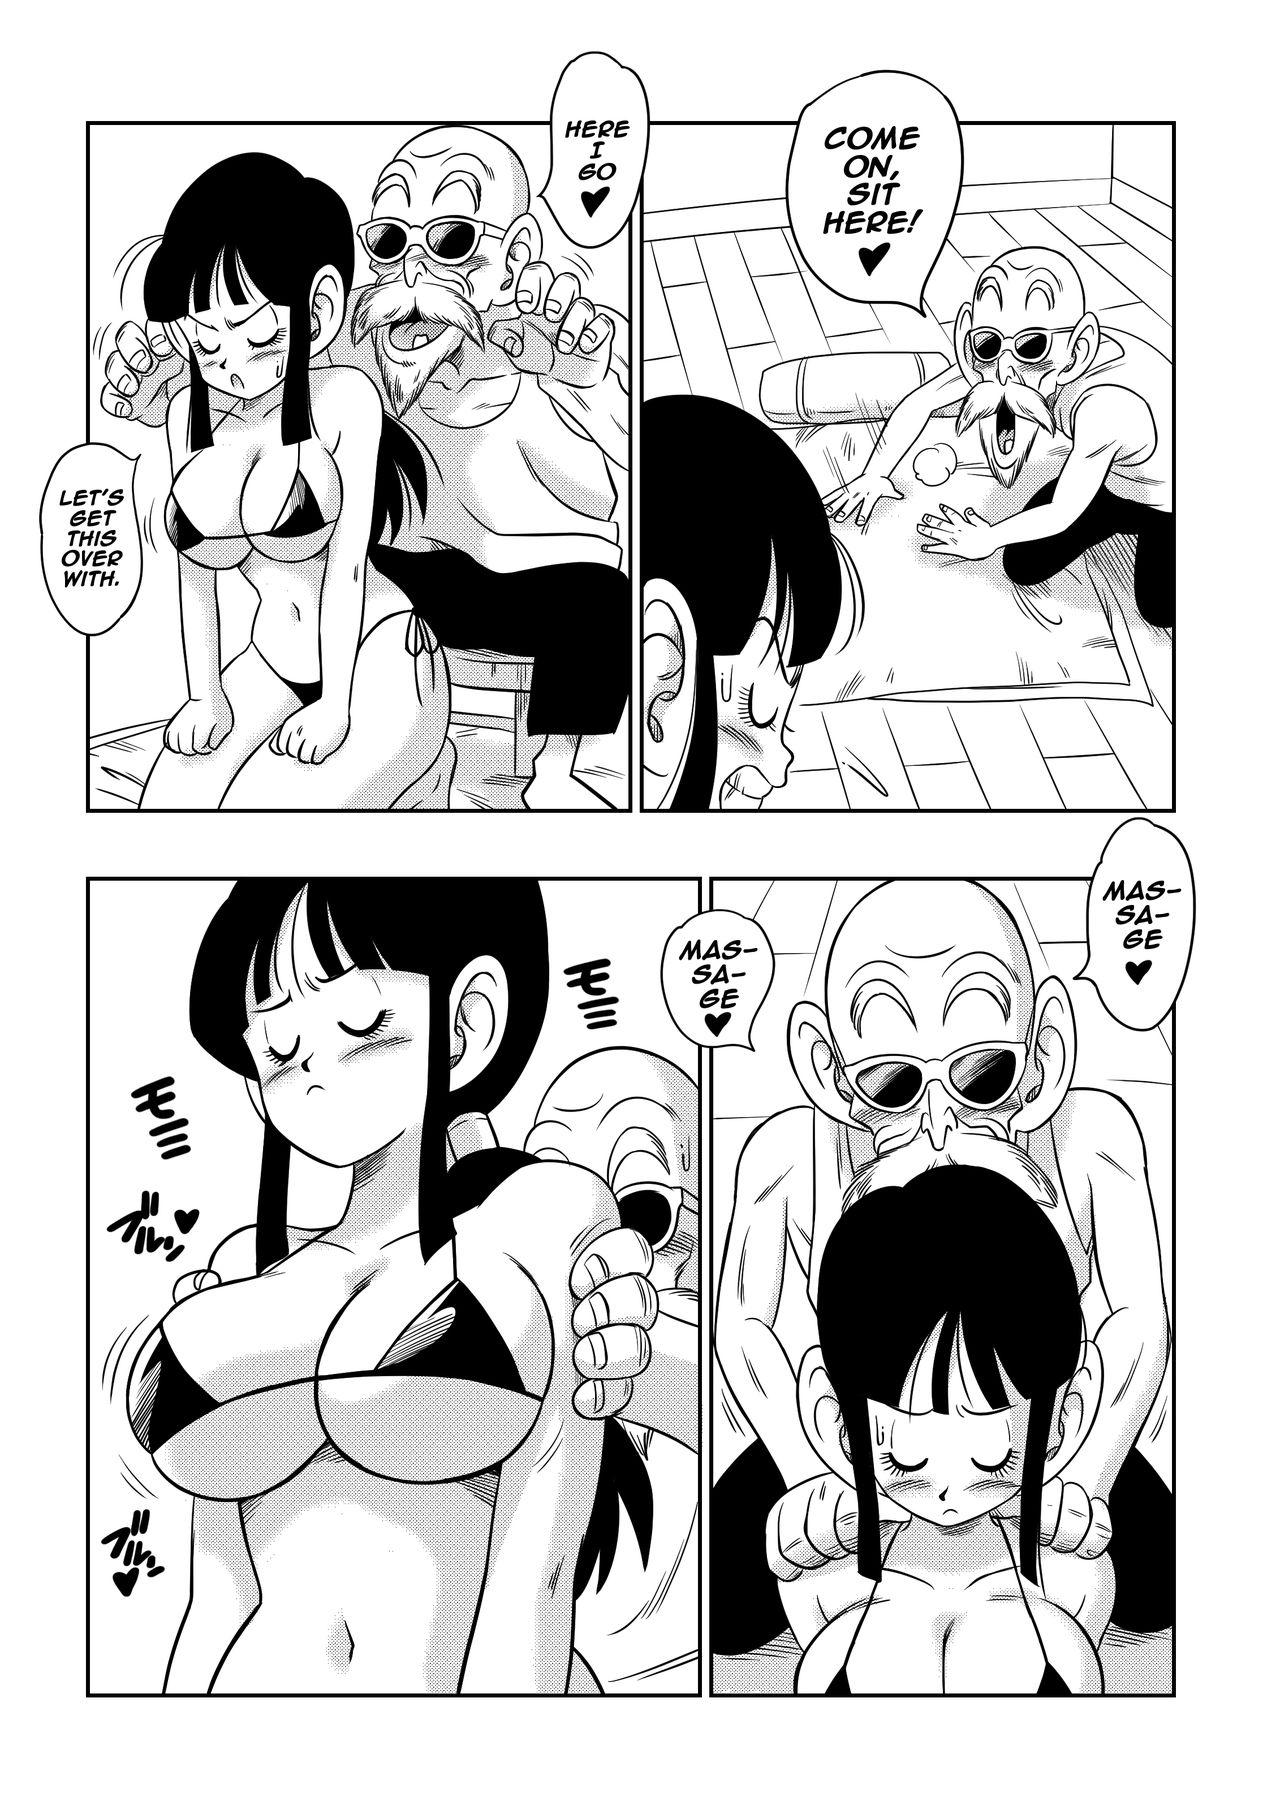 Peitos "An Ancient Tradition" - Young Wife is Harassed! - Dragon ball z Sucking Dick - Page 8